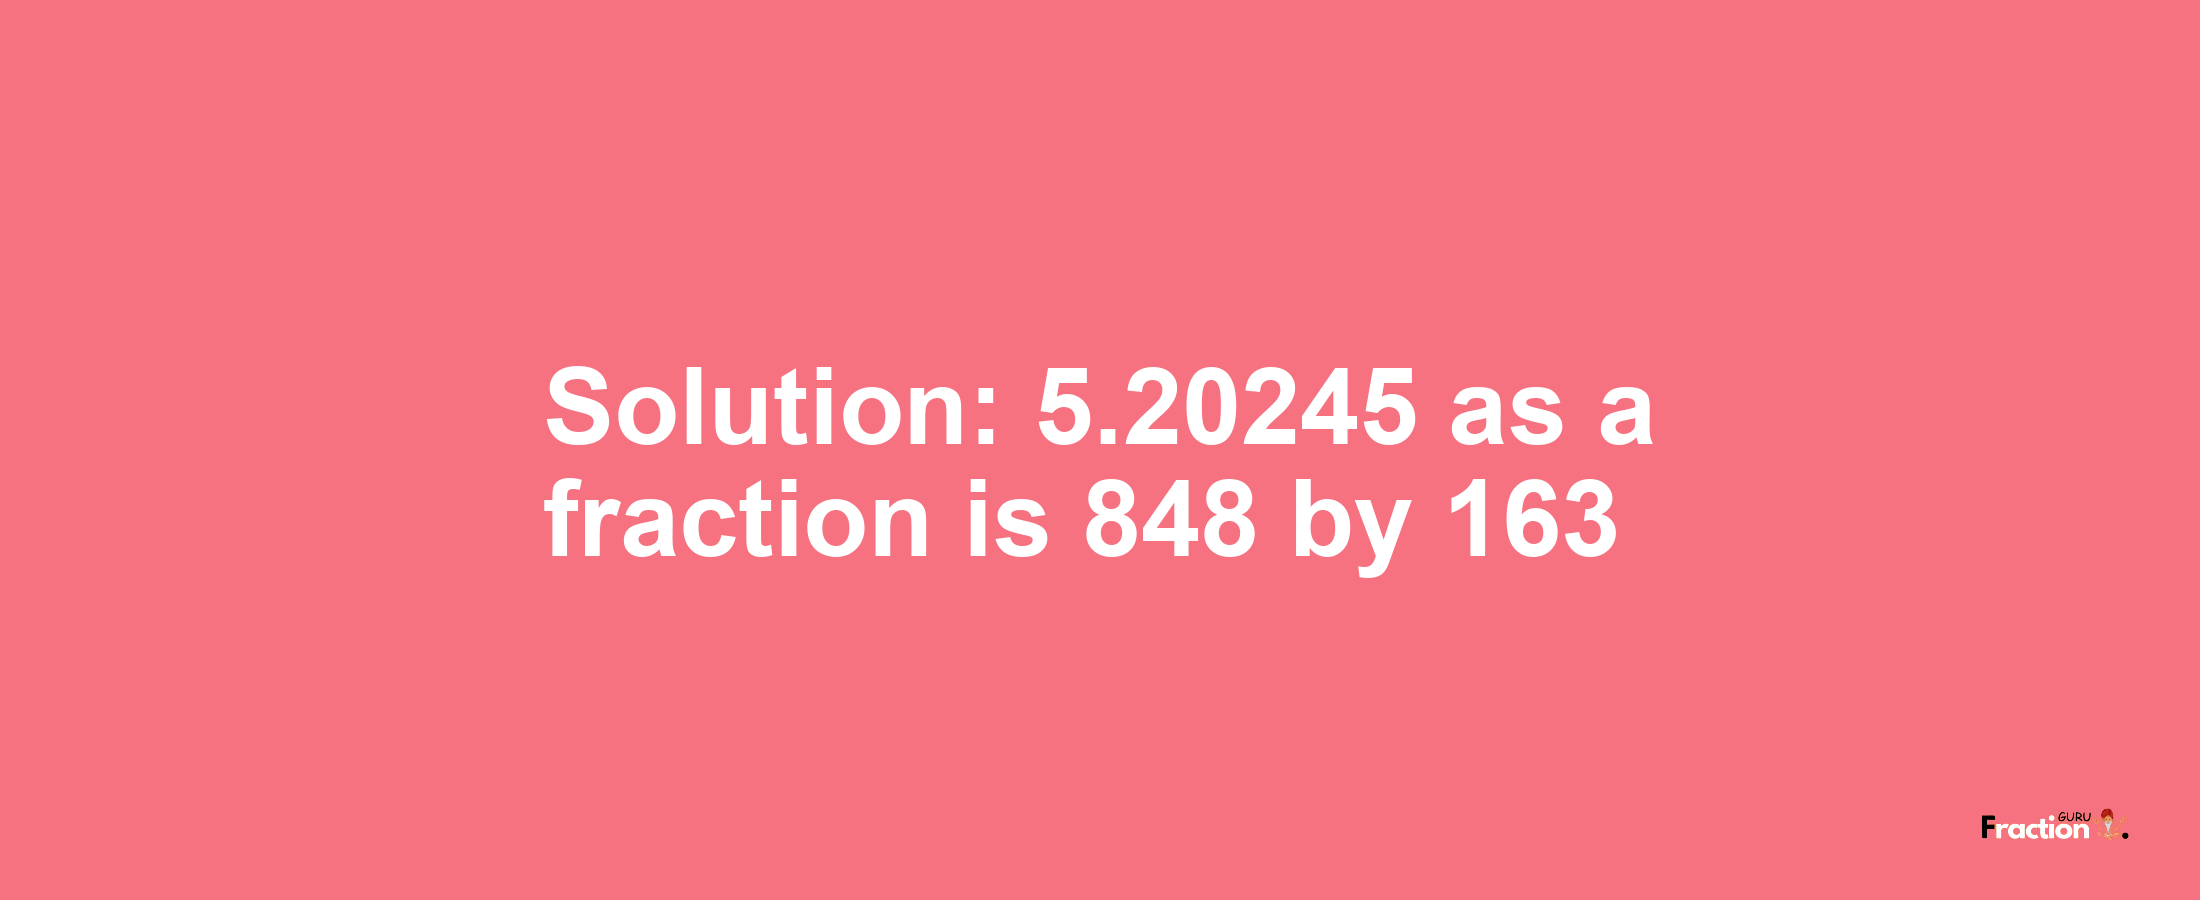 Solution:5.20245 as a fraction is 848/163